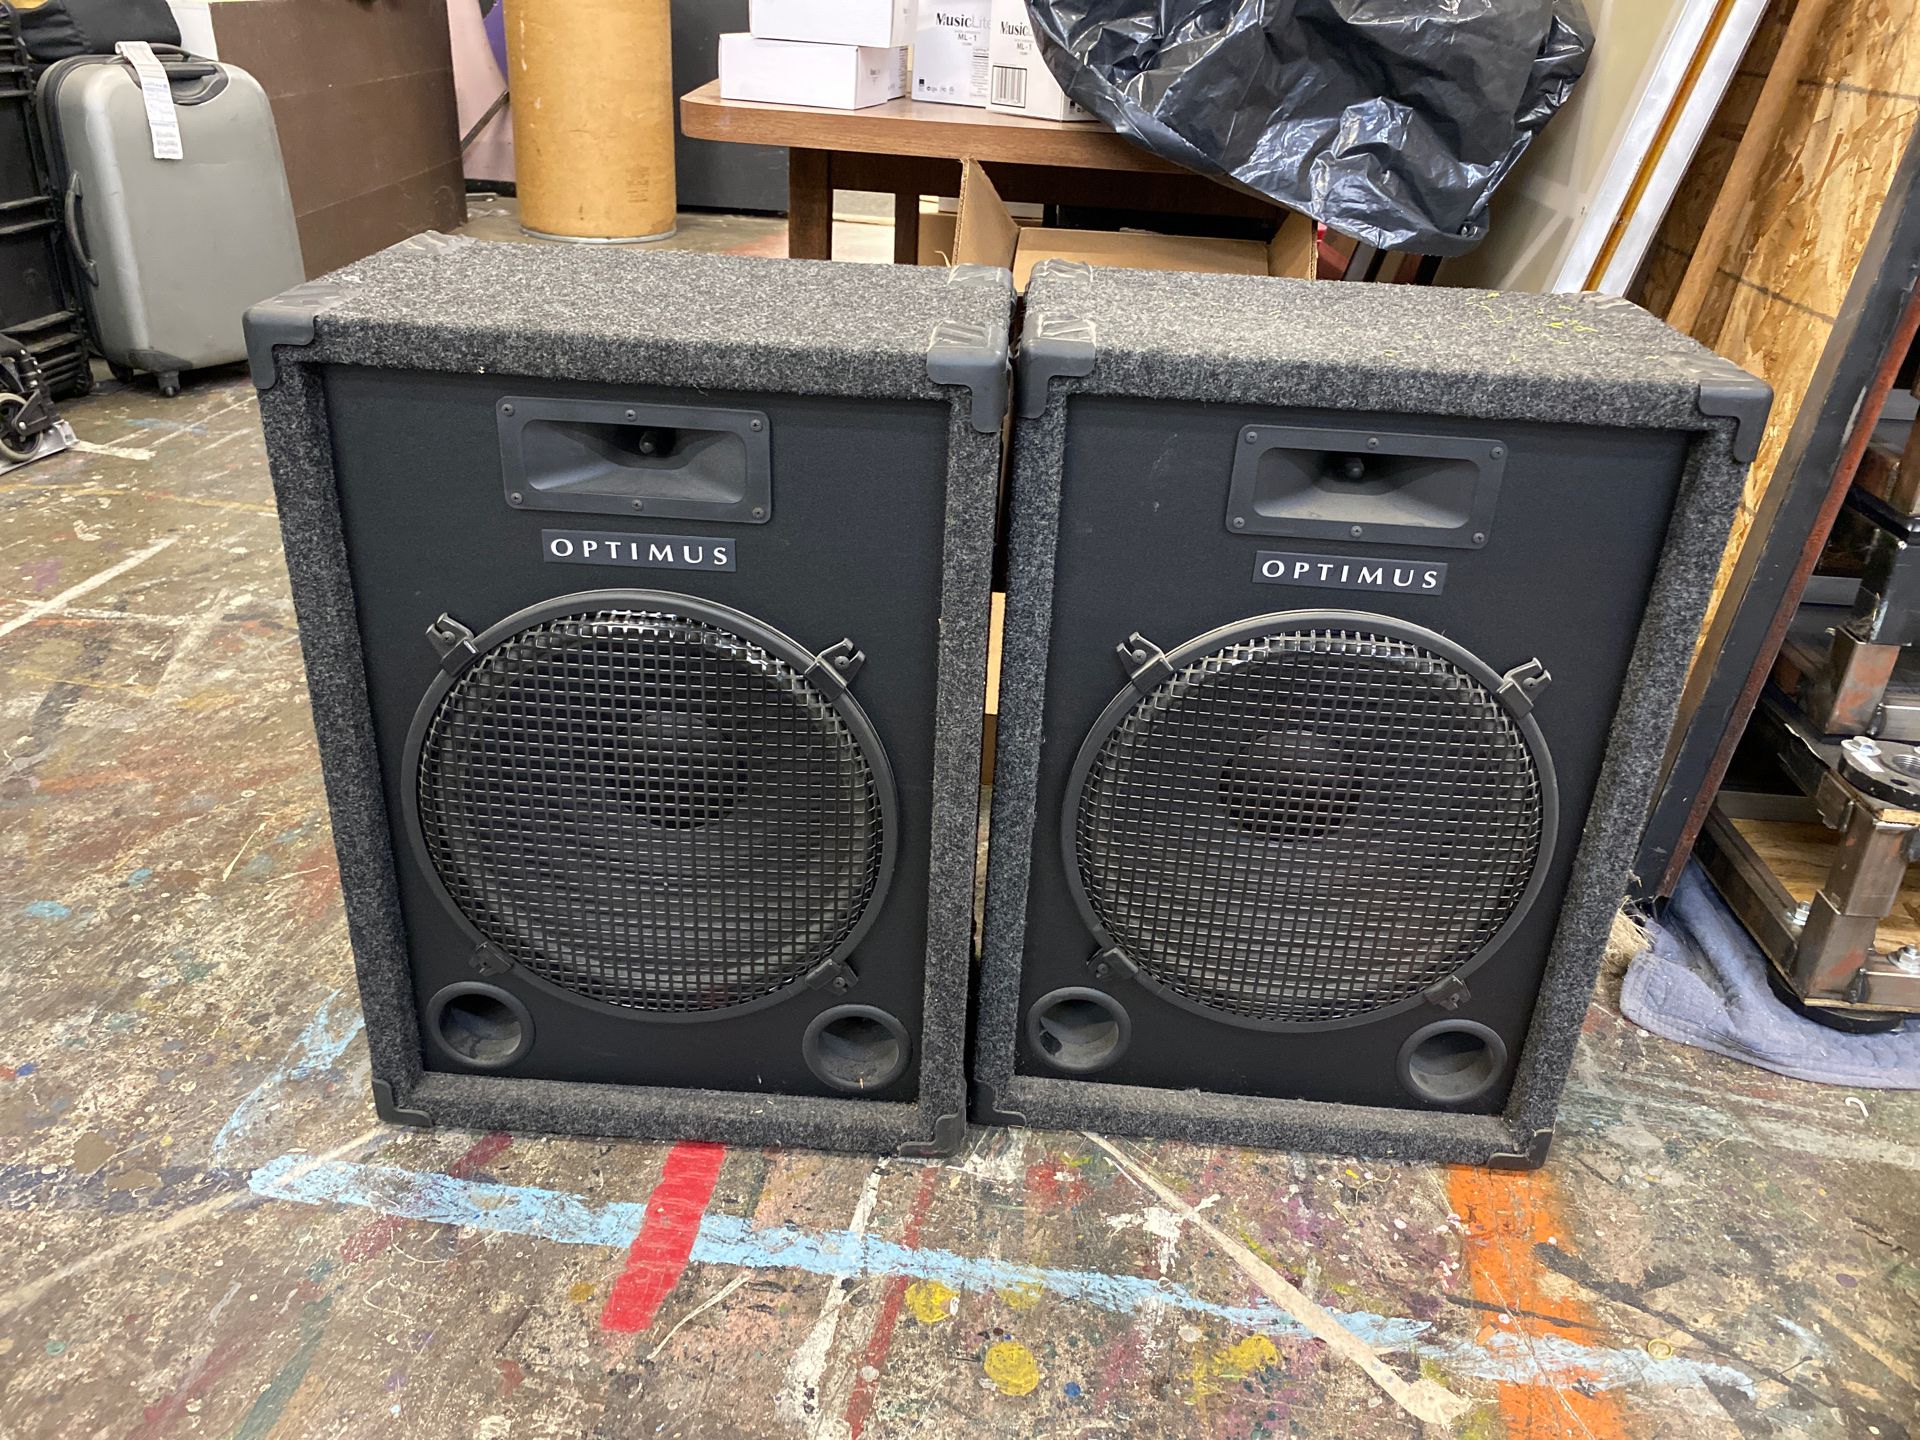 Optimus 8 ohms 300 watts max power speakers GREAY CONDITION